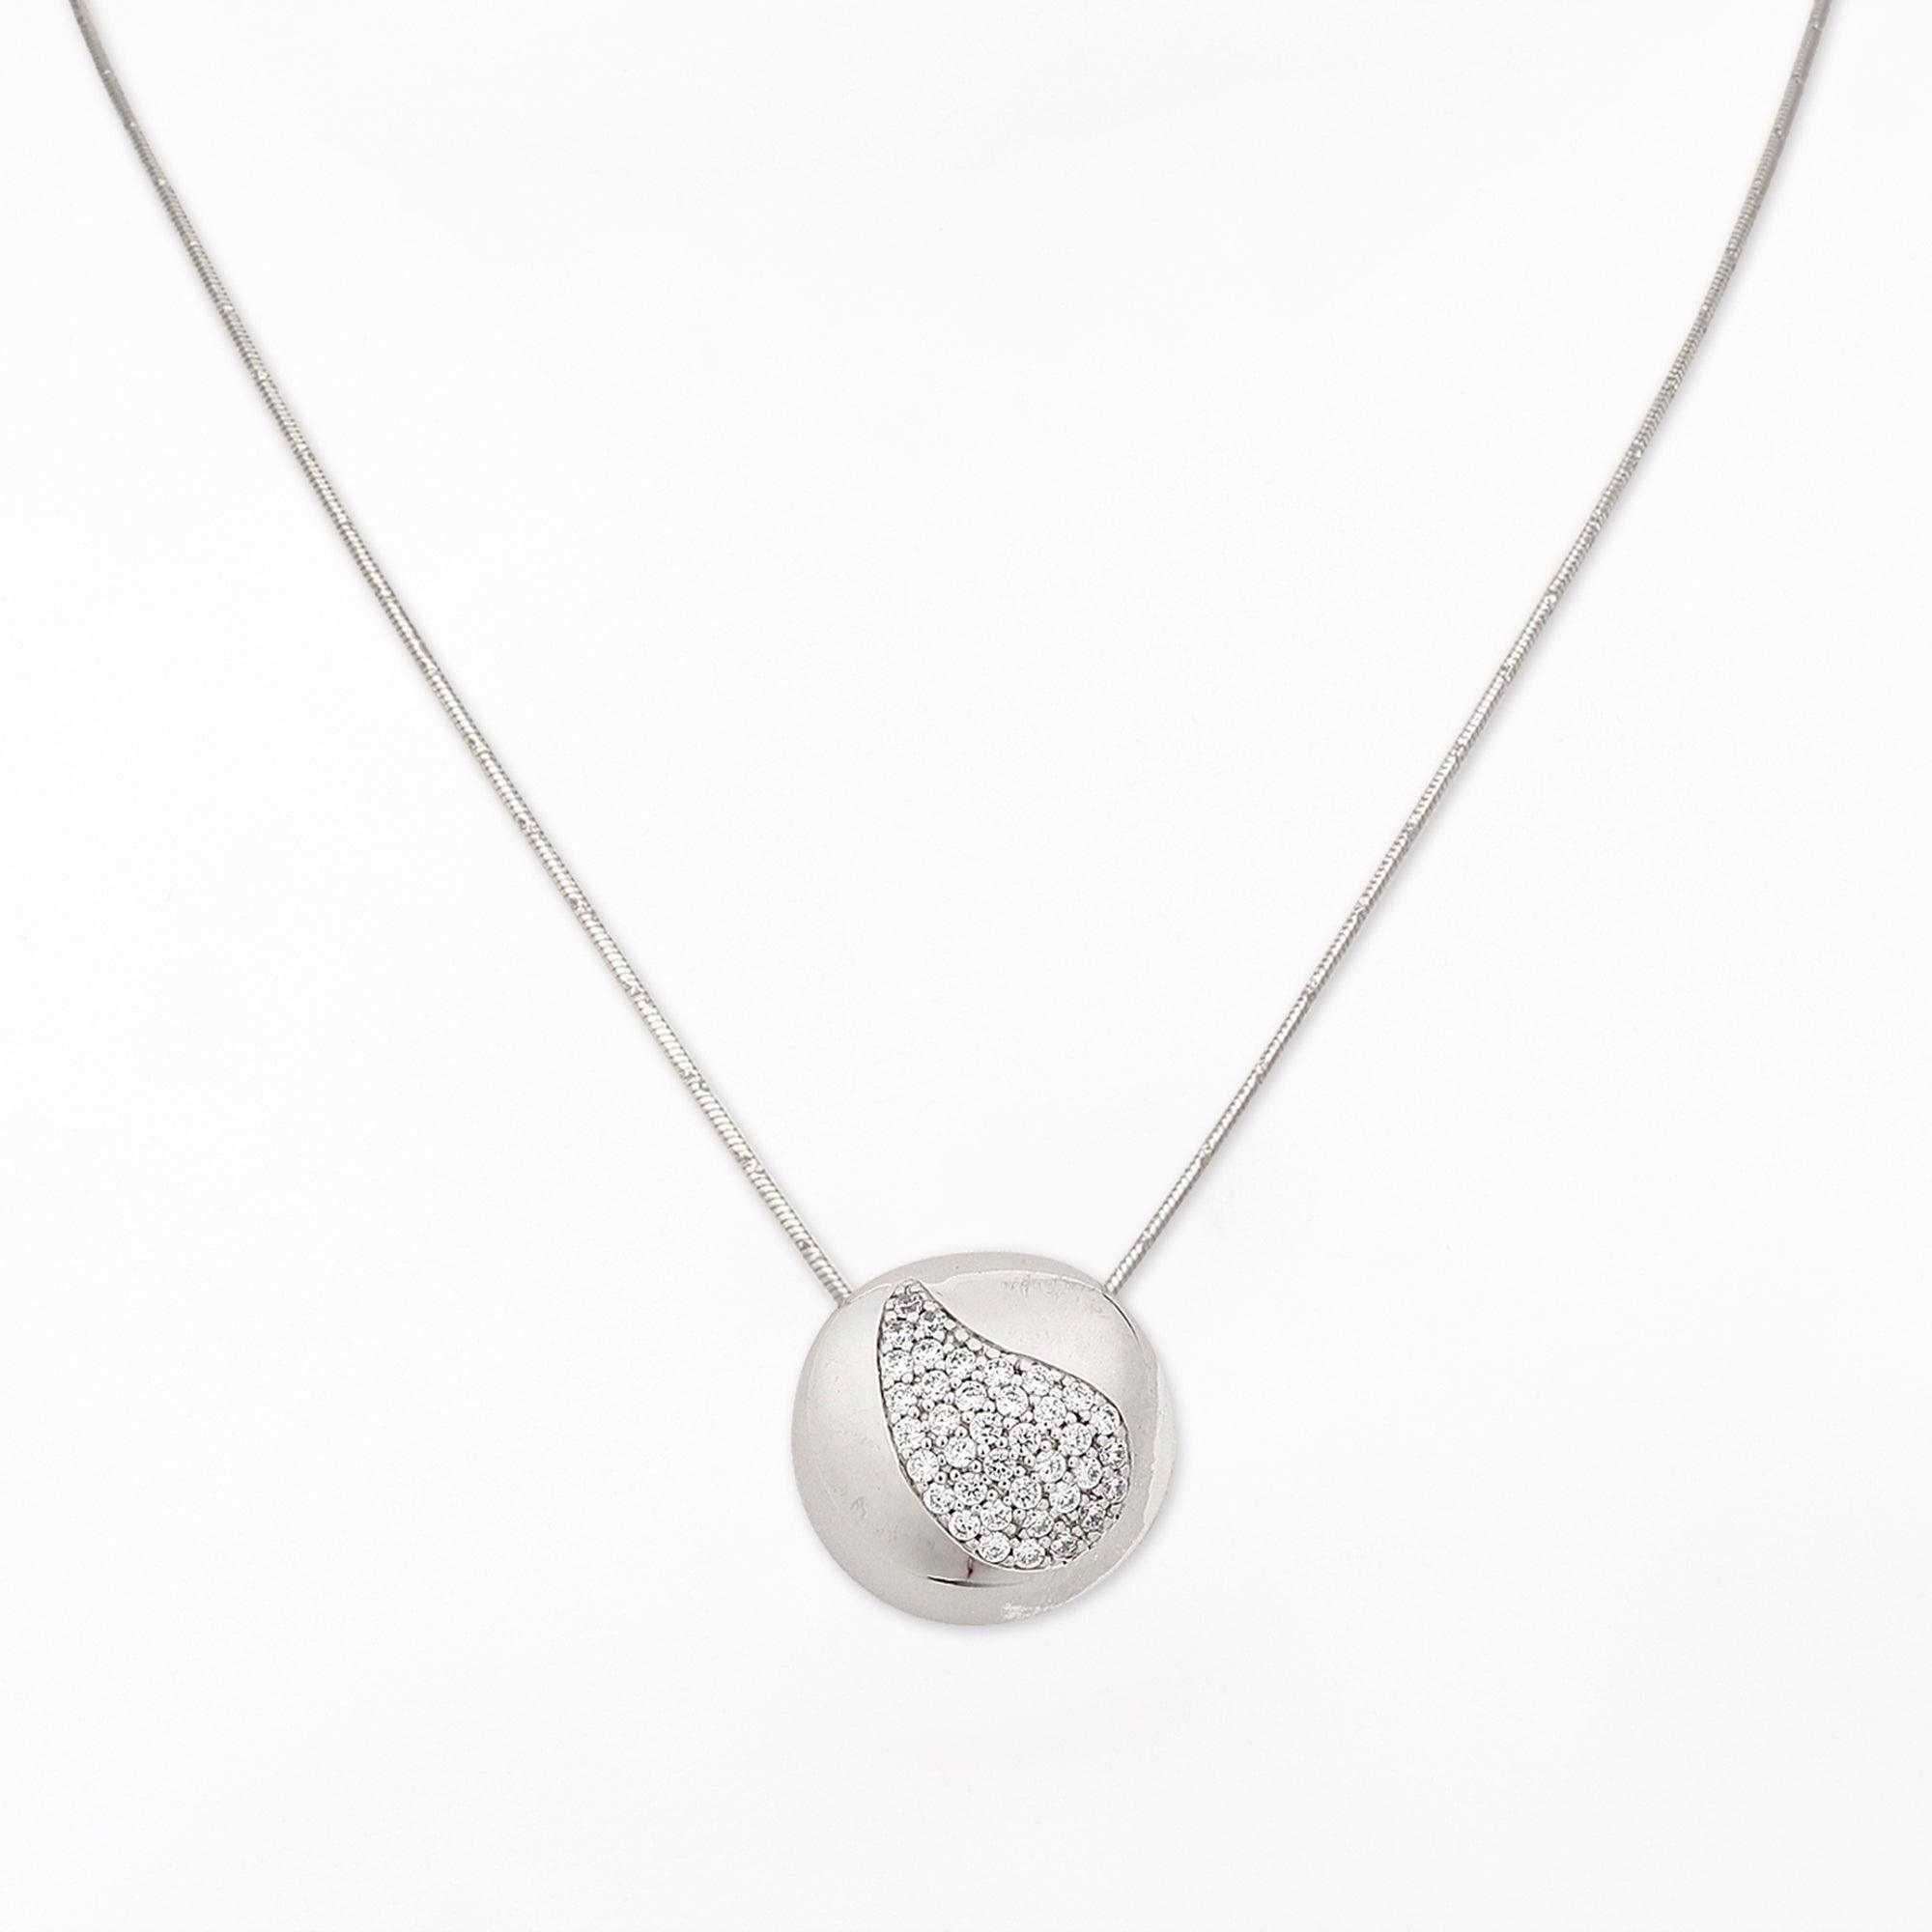 Paisley Dreamscape Silver Necklace - Diavo Jewels